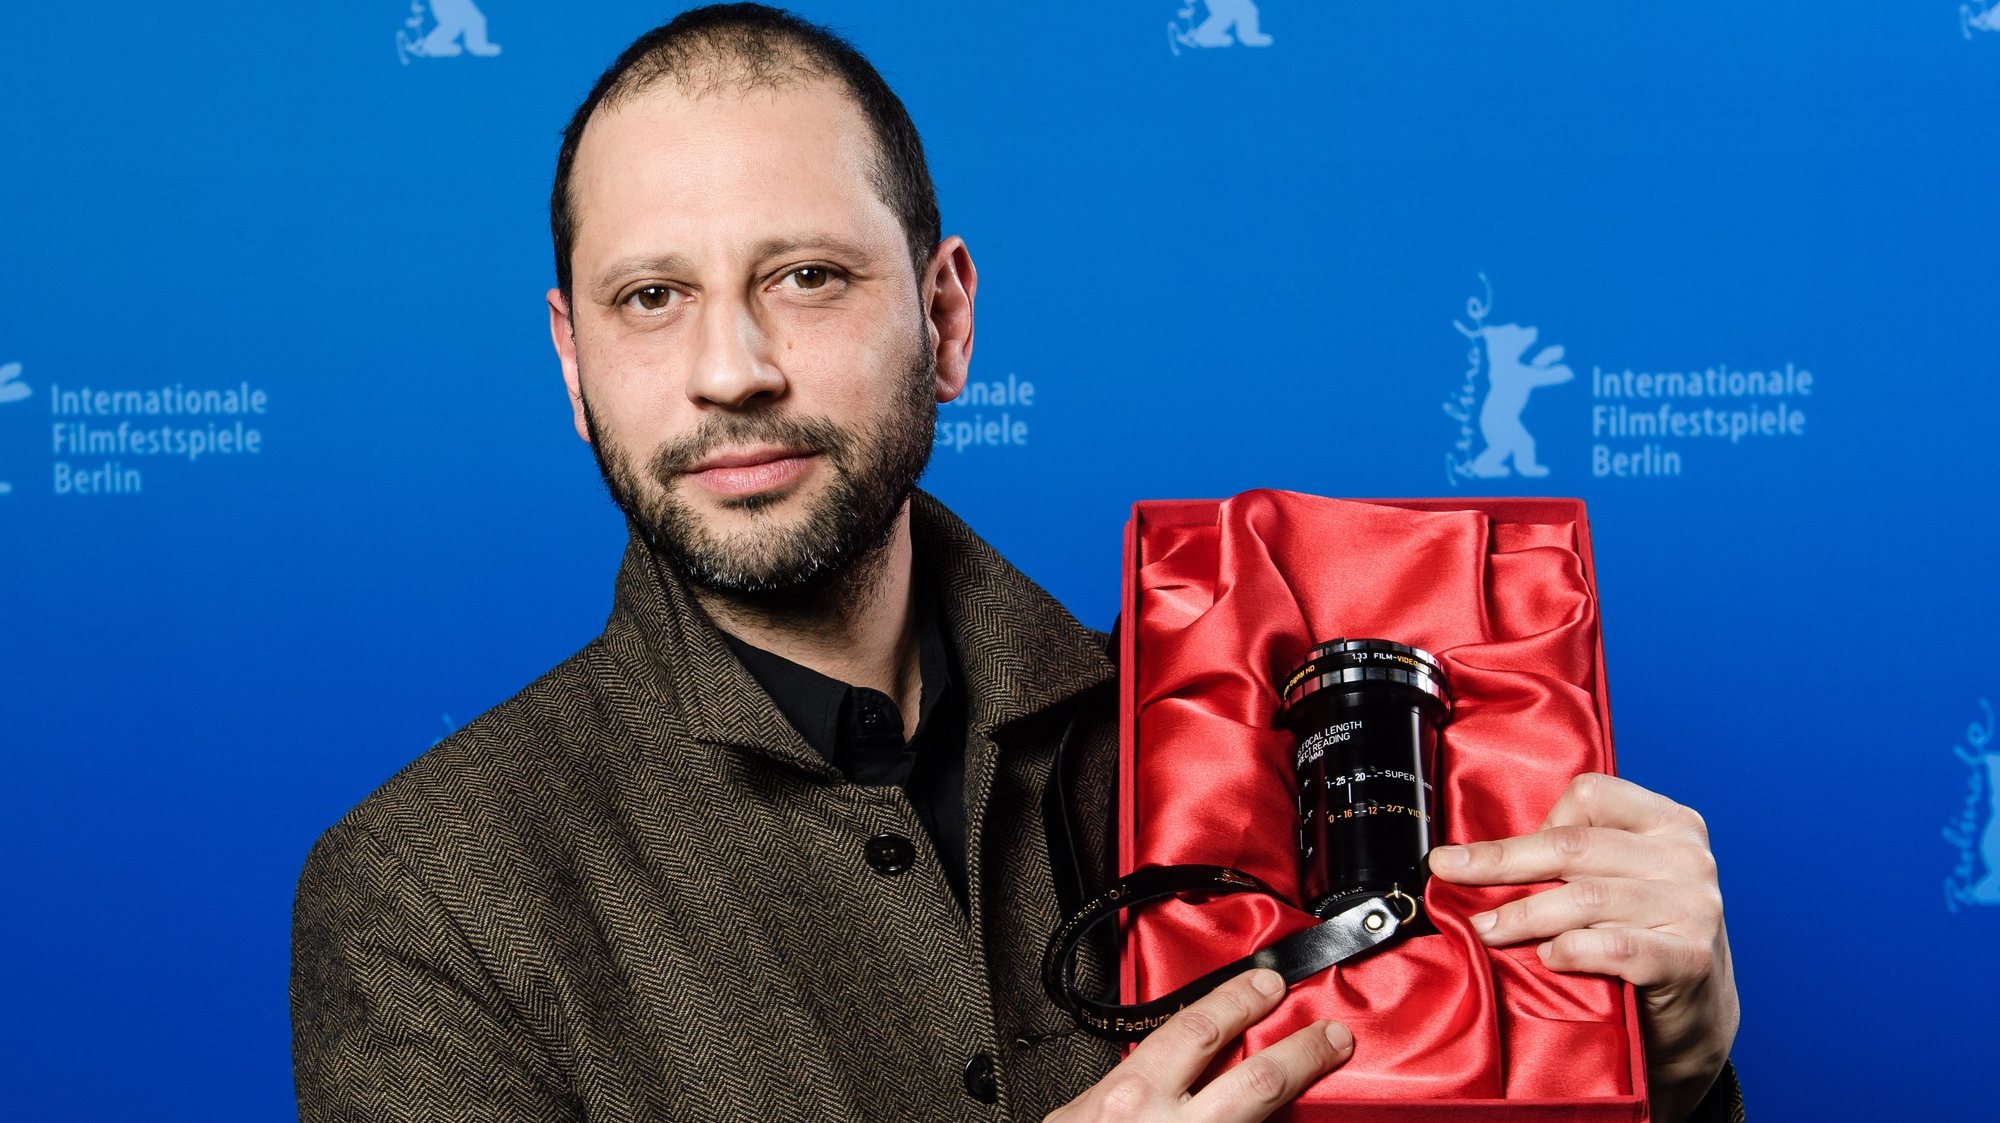 epa08260180 Camilo Restrepo poses with the GWFF First Feature Award for the movie &#039;Los Conductos&#039; during the Closing and Awards Ceremony of the 70th annual Berlin International Film Festival (Berlinale), in Berlin, Germany, 29 February 2020. The Berlinale runs from 20 February to 01 March 2020.  EPA/CLEMENS BILAN